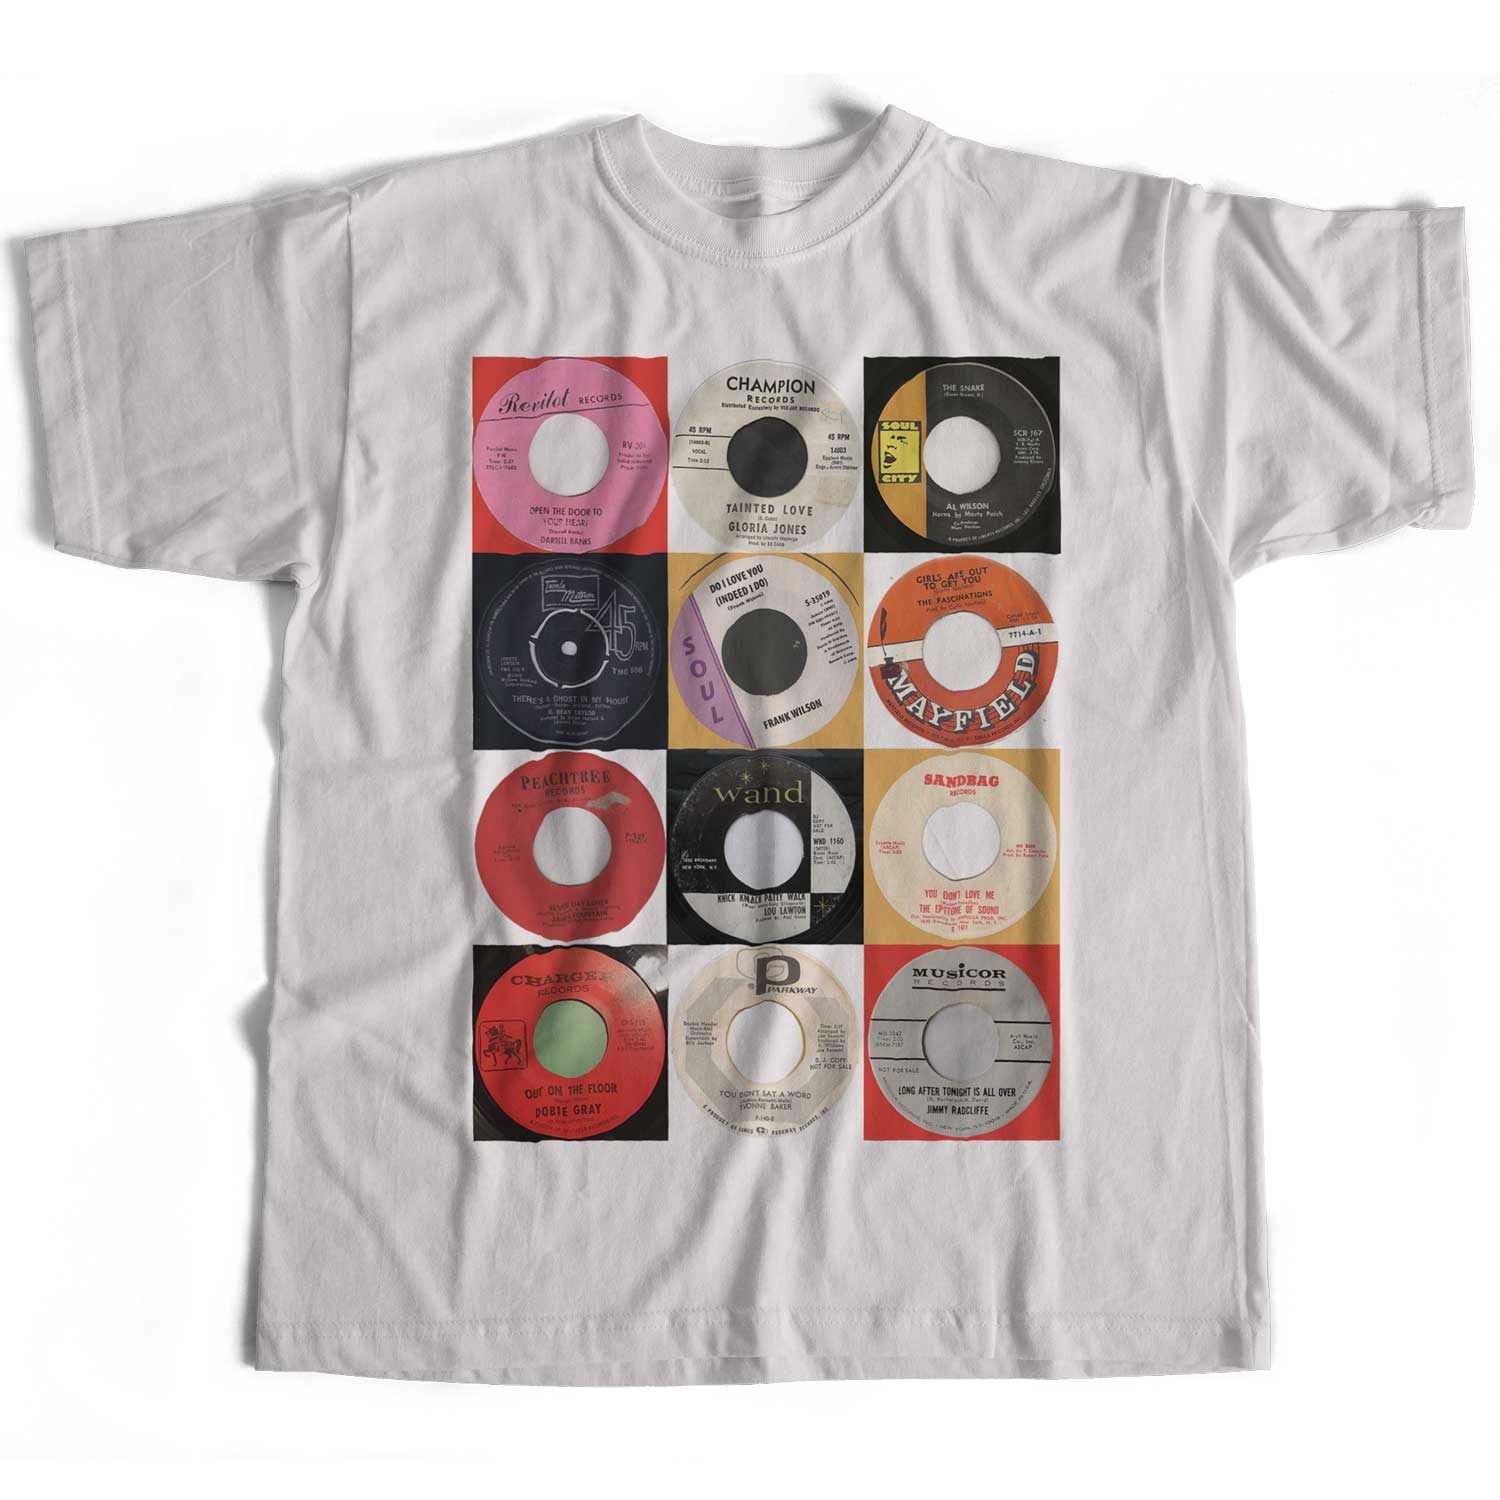 Northern Soul T Shirt - Classic 7" Singles Collection Montage Old Skool Hooligans